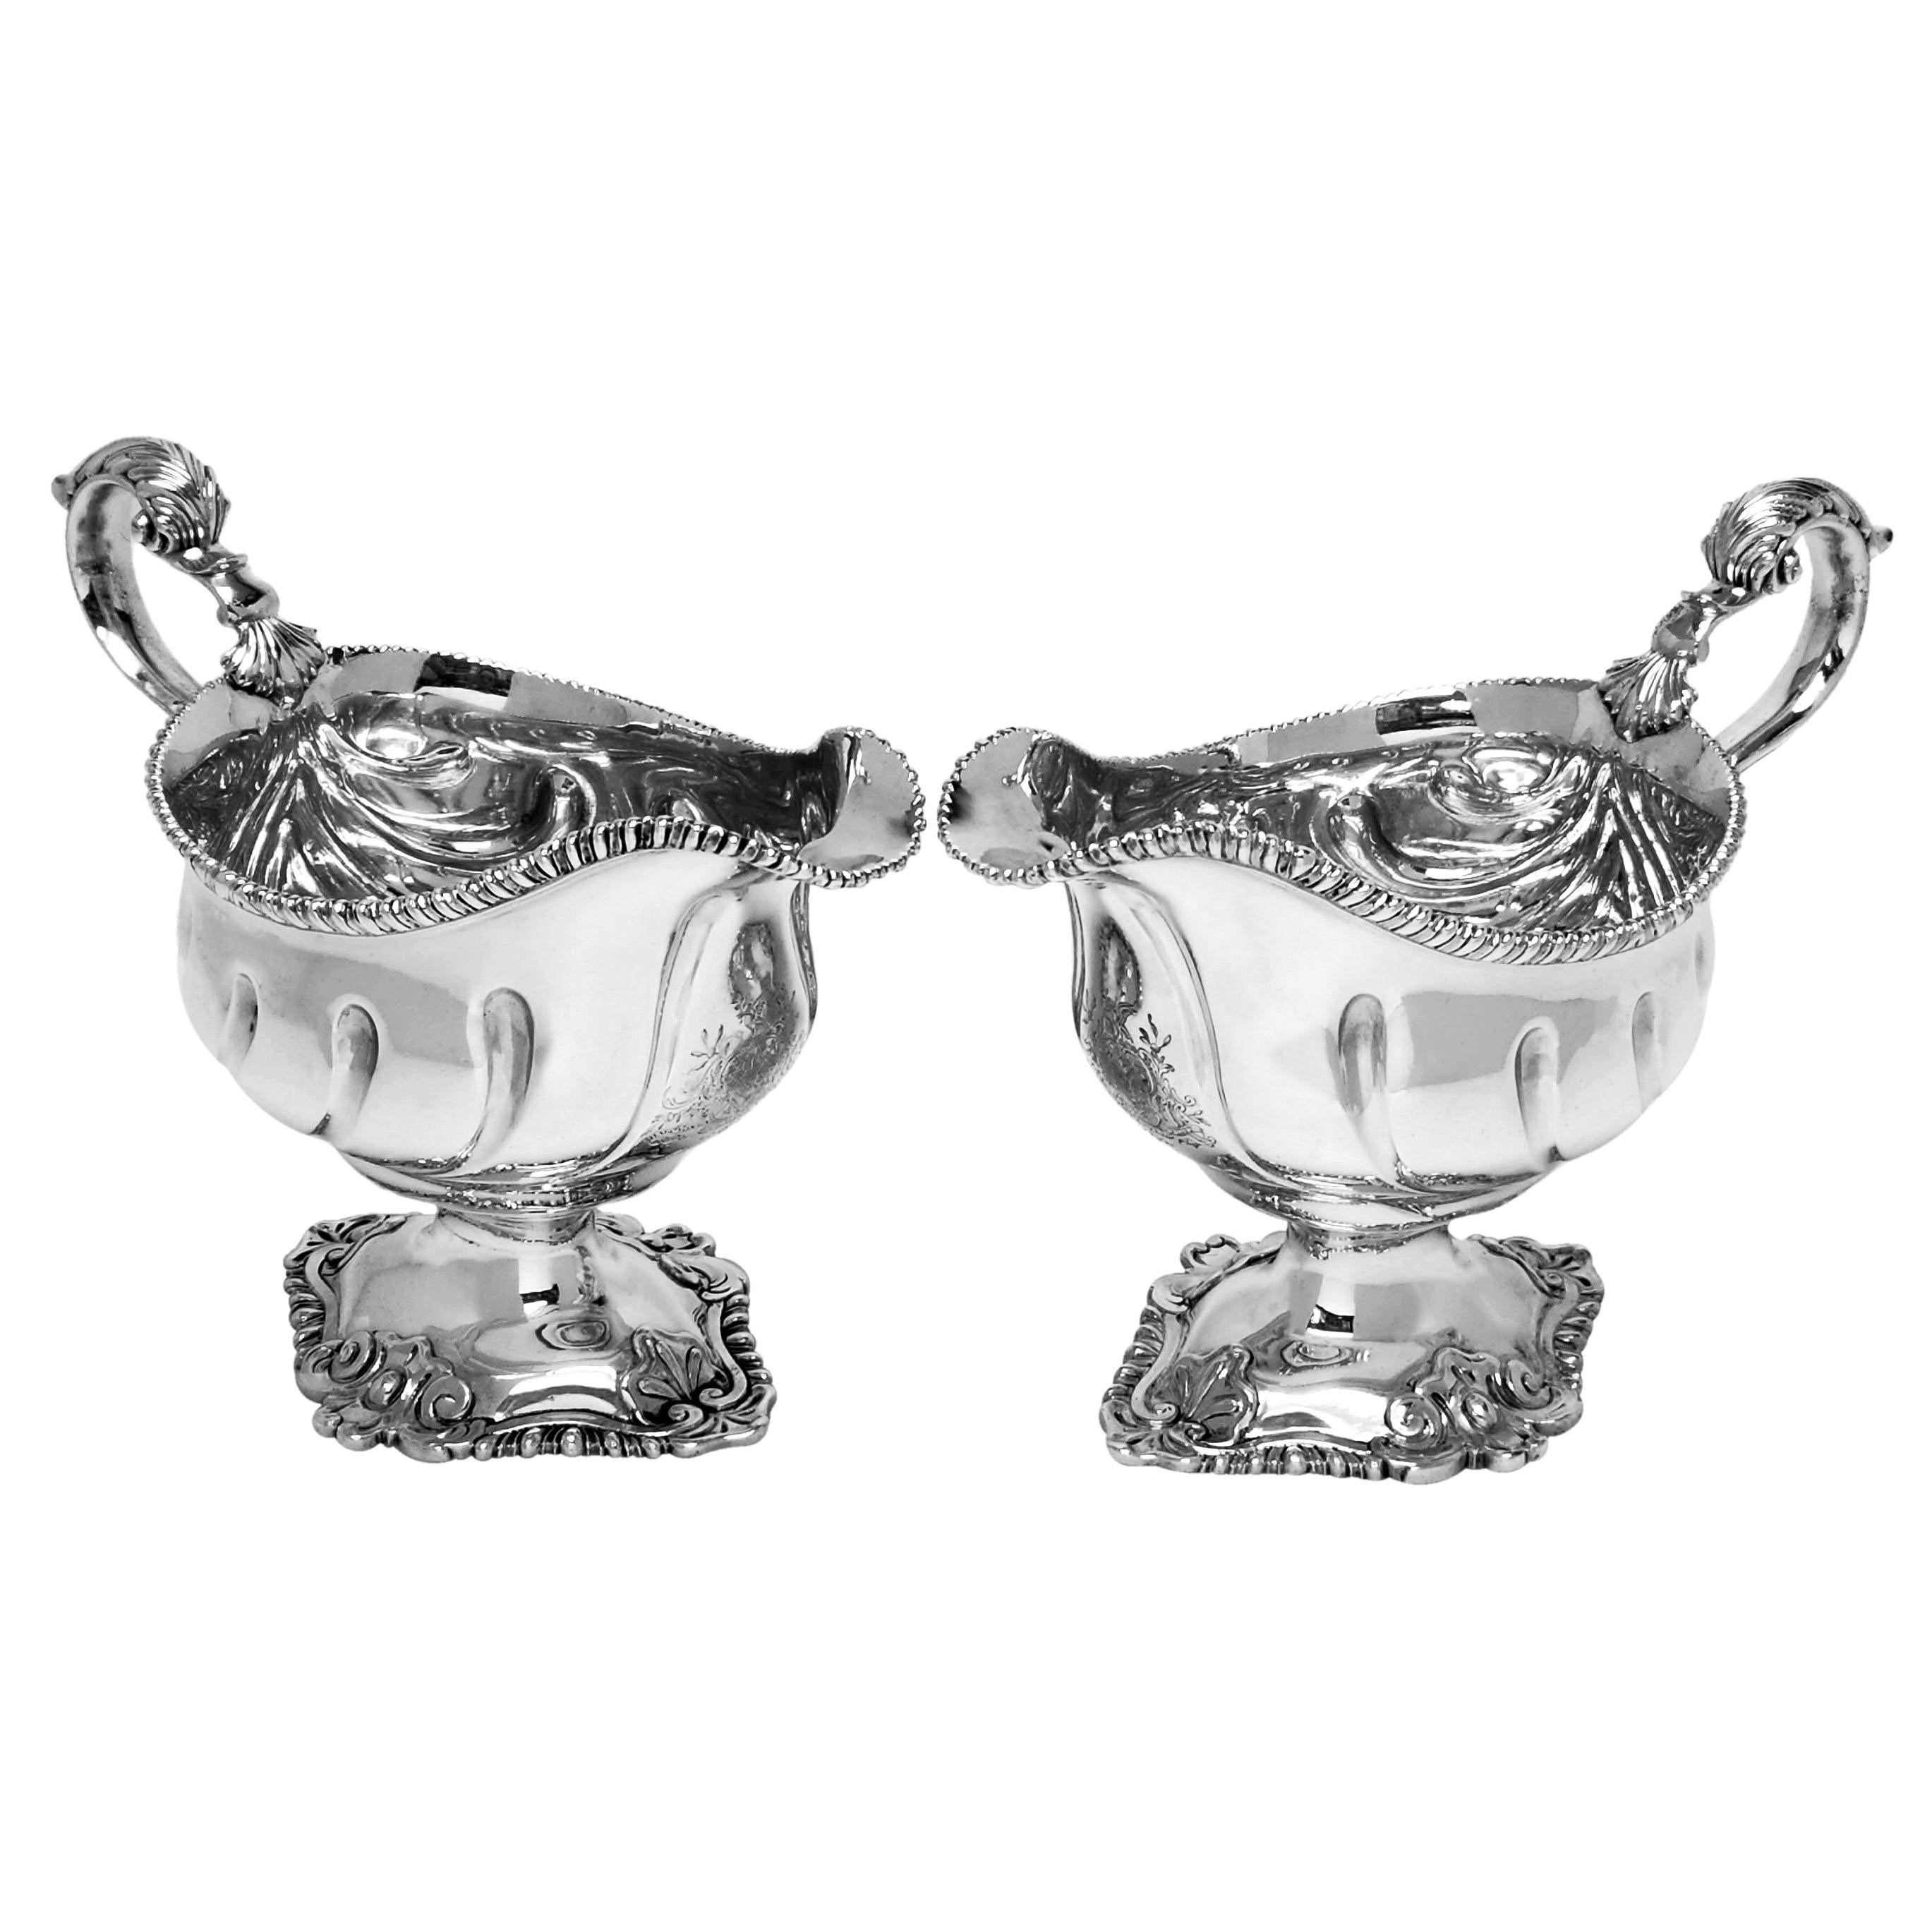 A set of 4 Antique George III sterling silver sauce boats decorated with gadroon borders on the lip and foot. The Foot is further embellished with a scroll details. Each Gravy Boat has a large armorial engraved below the spout. 
These Sauce Boats